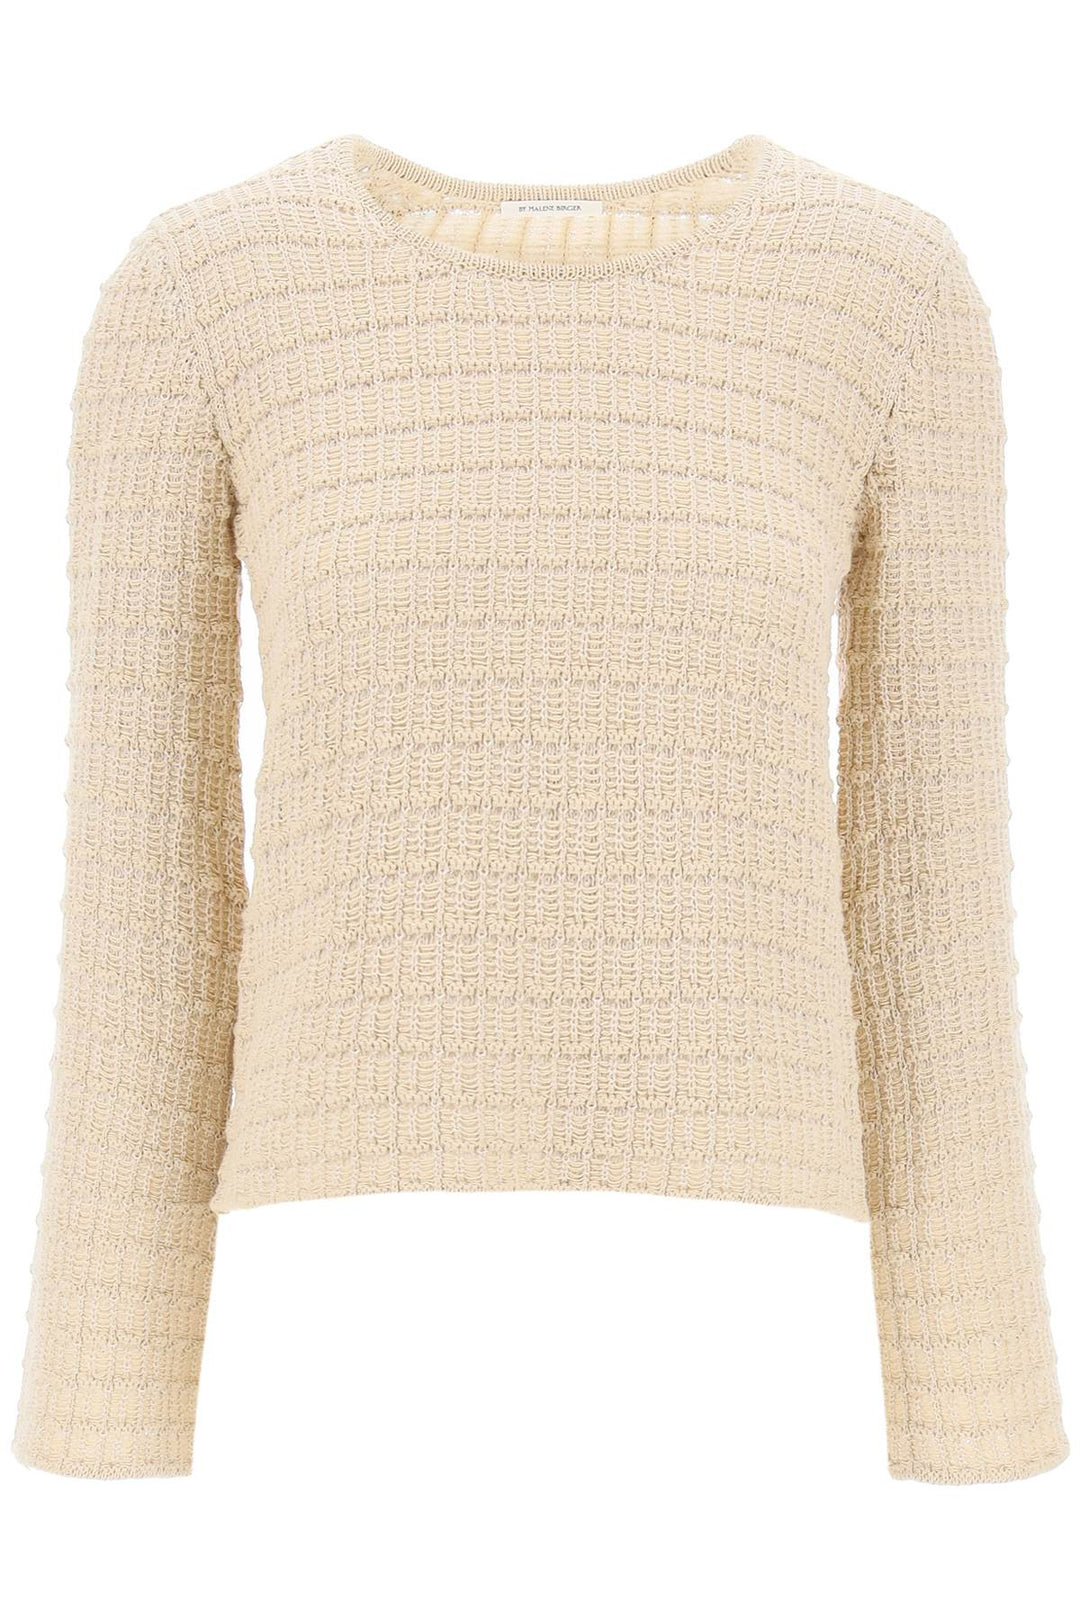 By Malene Birger Replace With Double Quotecharmina Cotton Knit Pullover   Beige